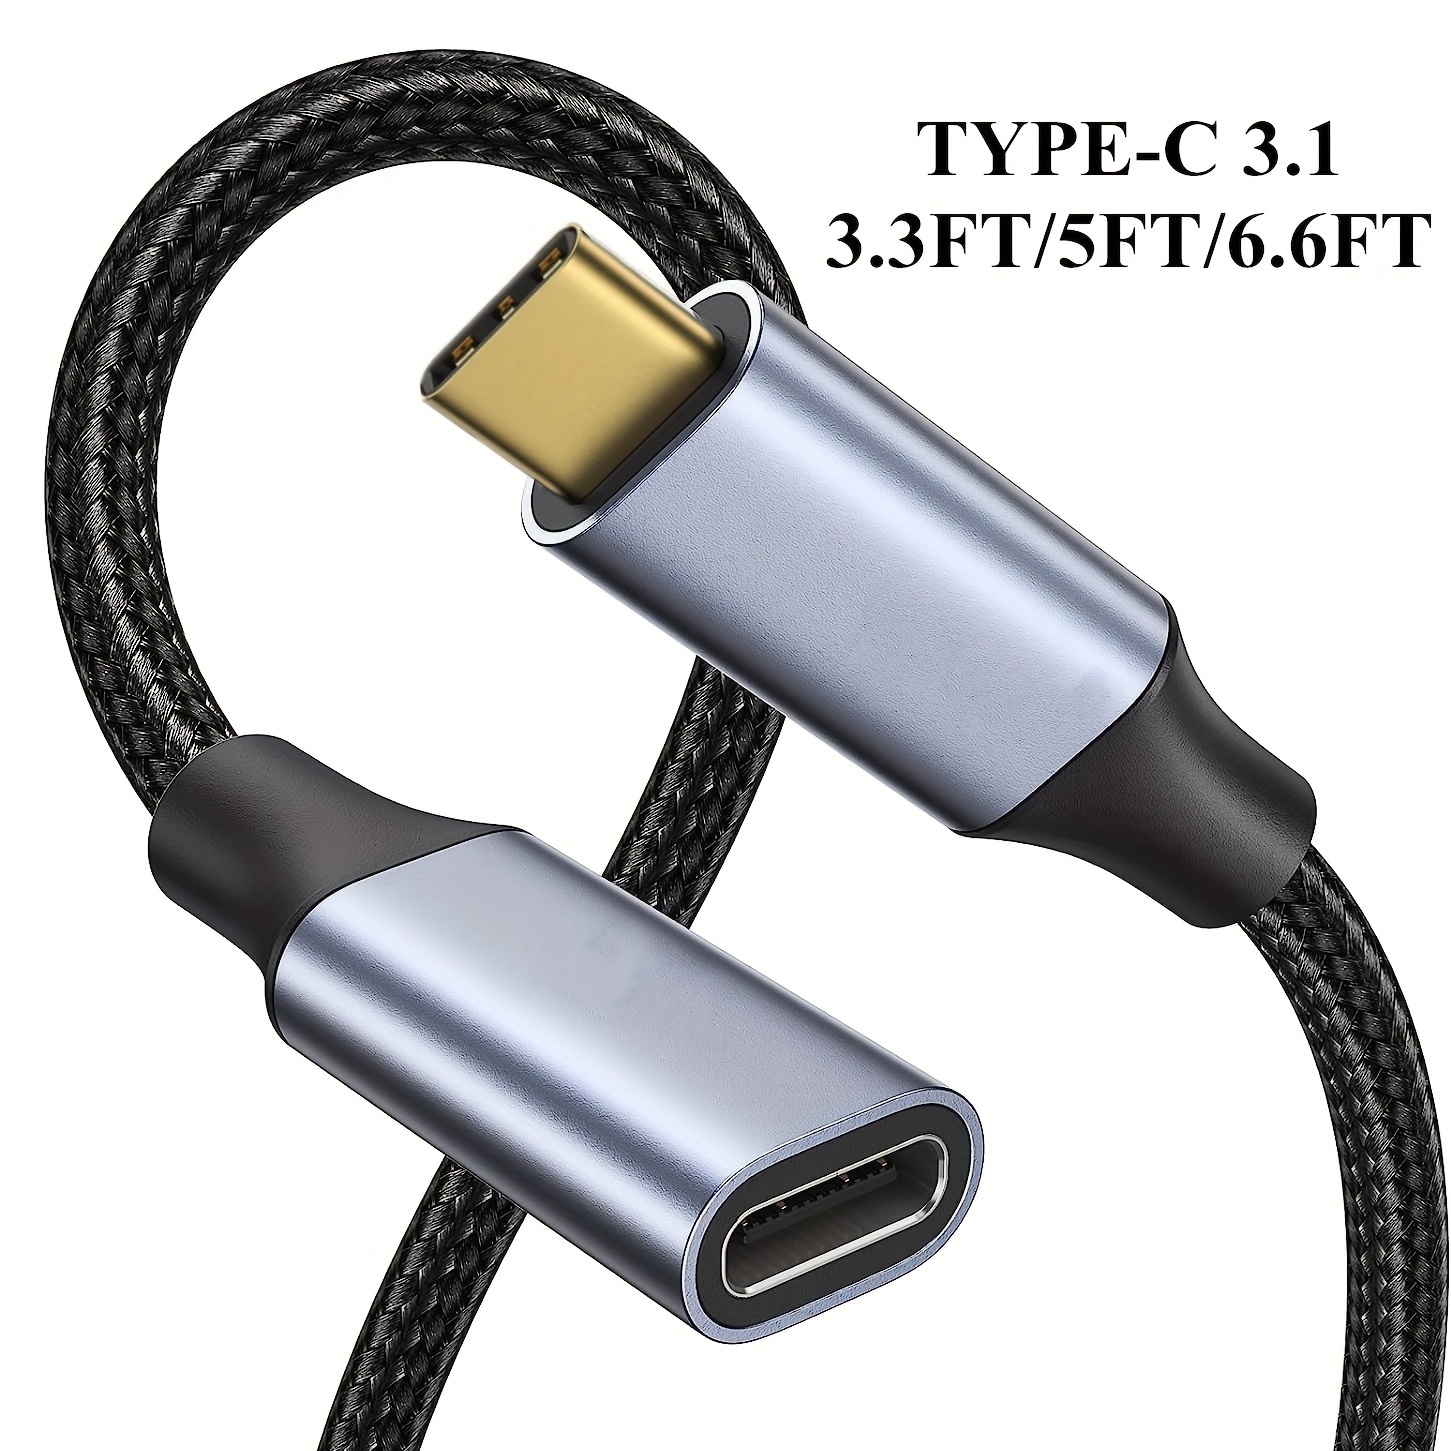 1m (3.3ft) USB-A to USB-C Charging Cable, Charge & Sync, USB 10Gbps, USB A  to USB C Data Cord, M/M, Black